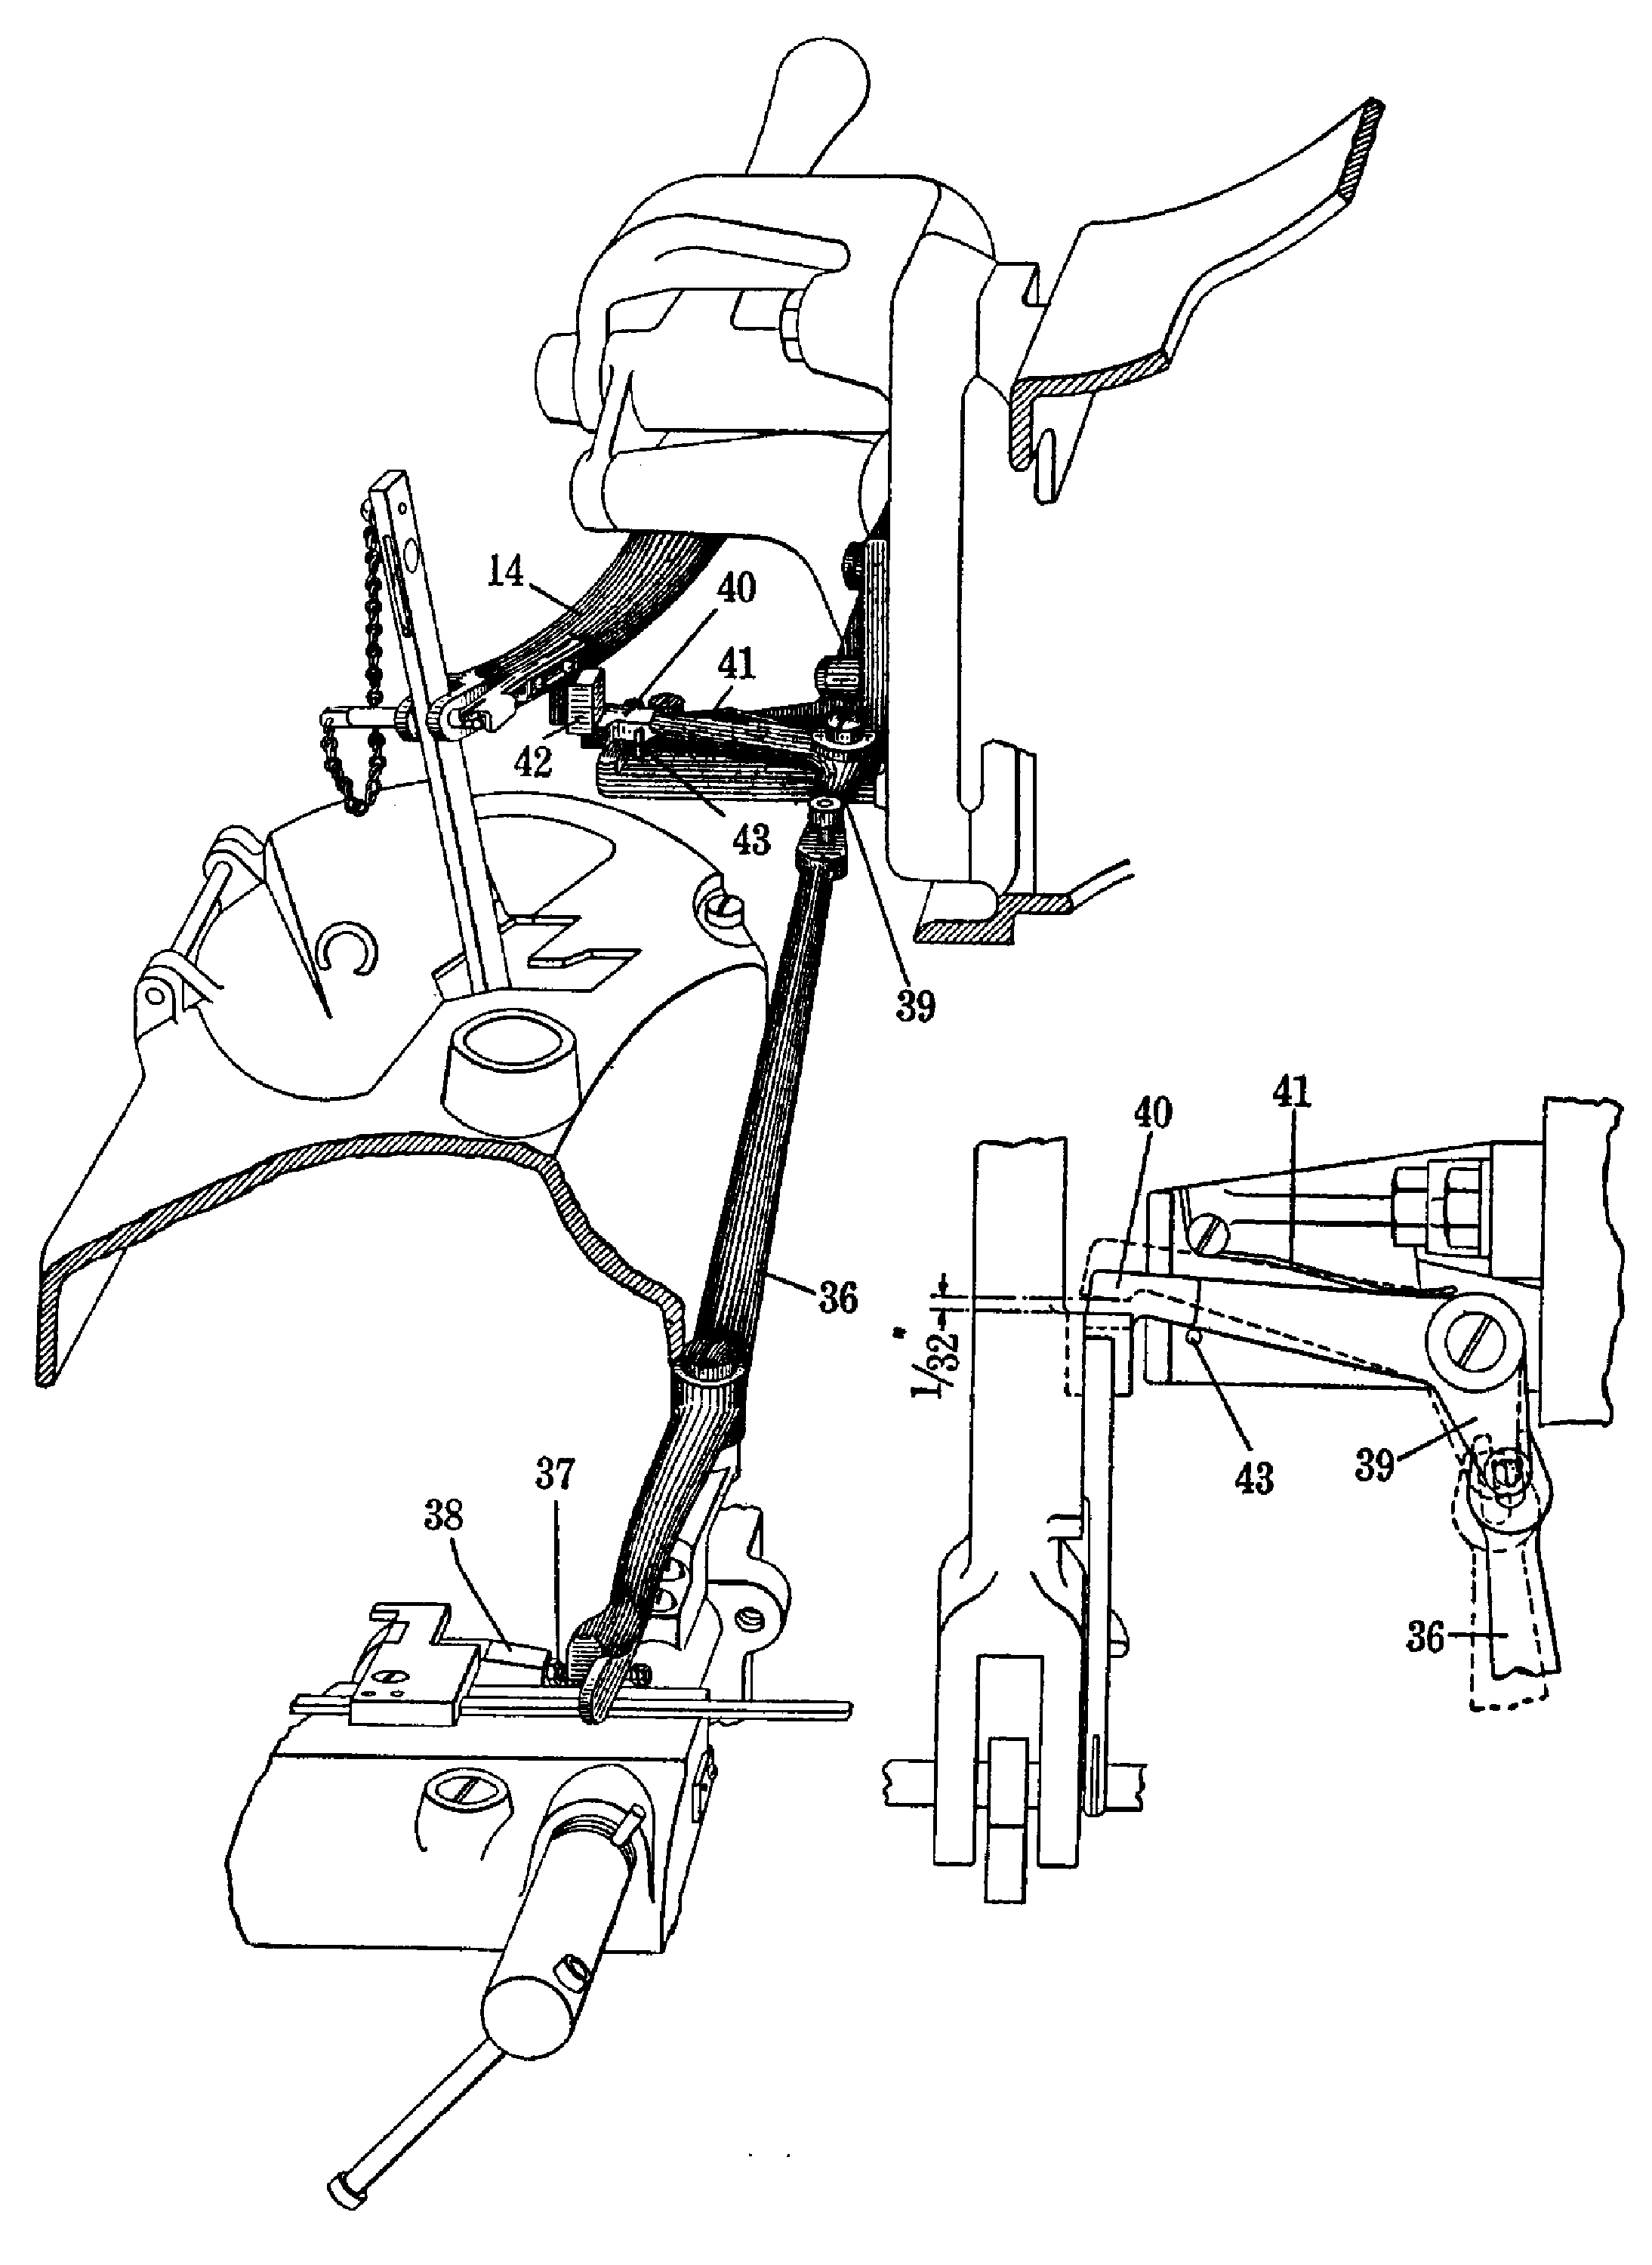 Line drawing of pump stop.